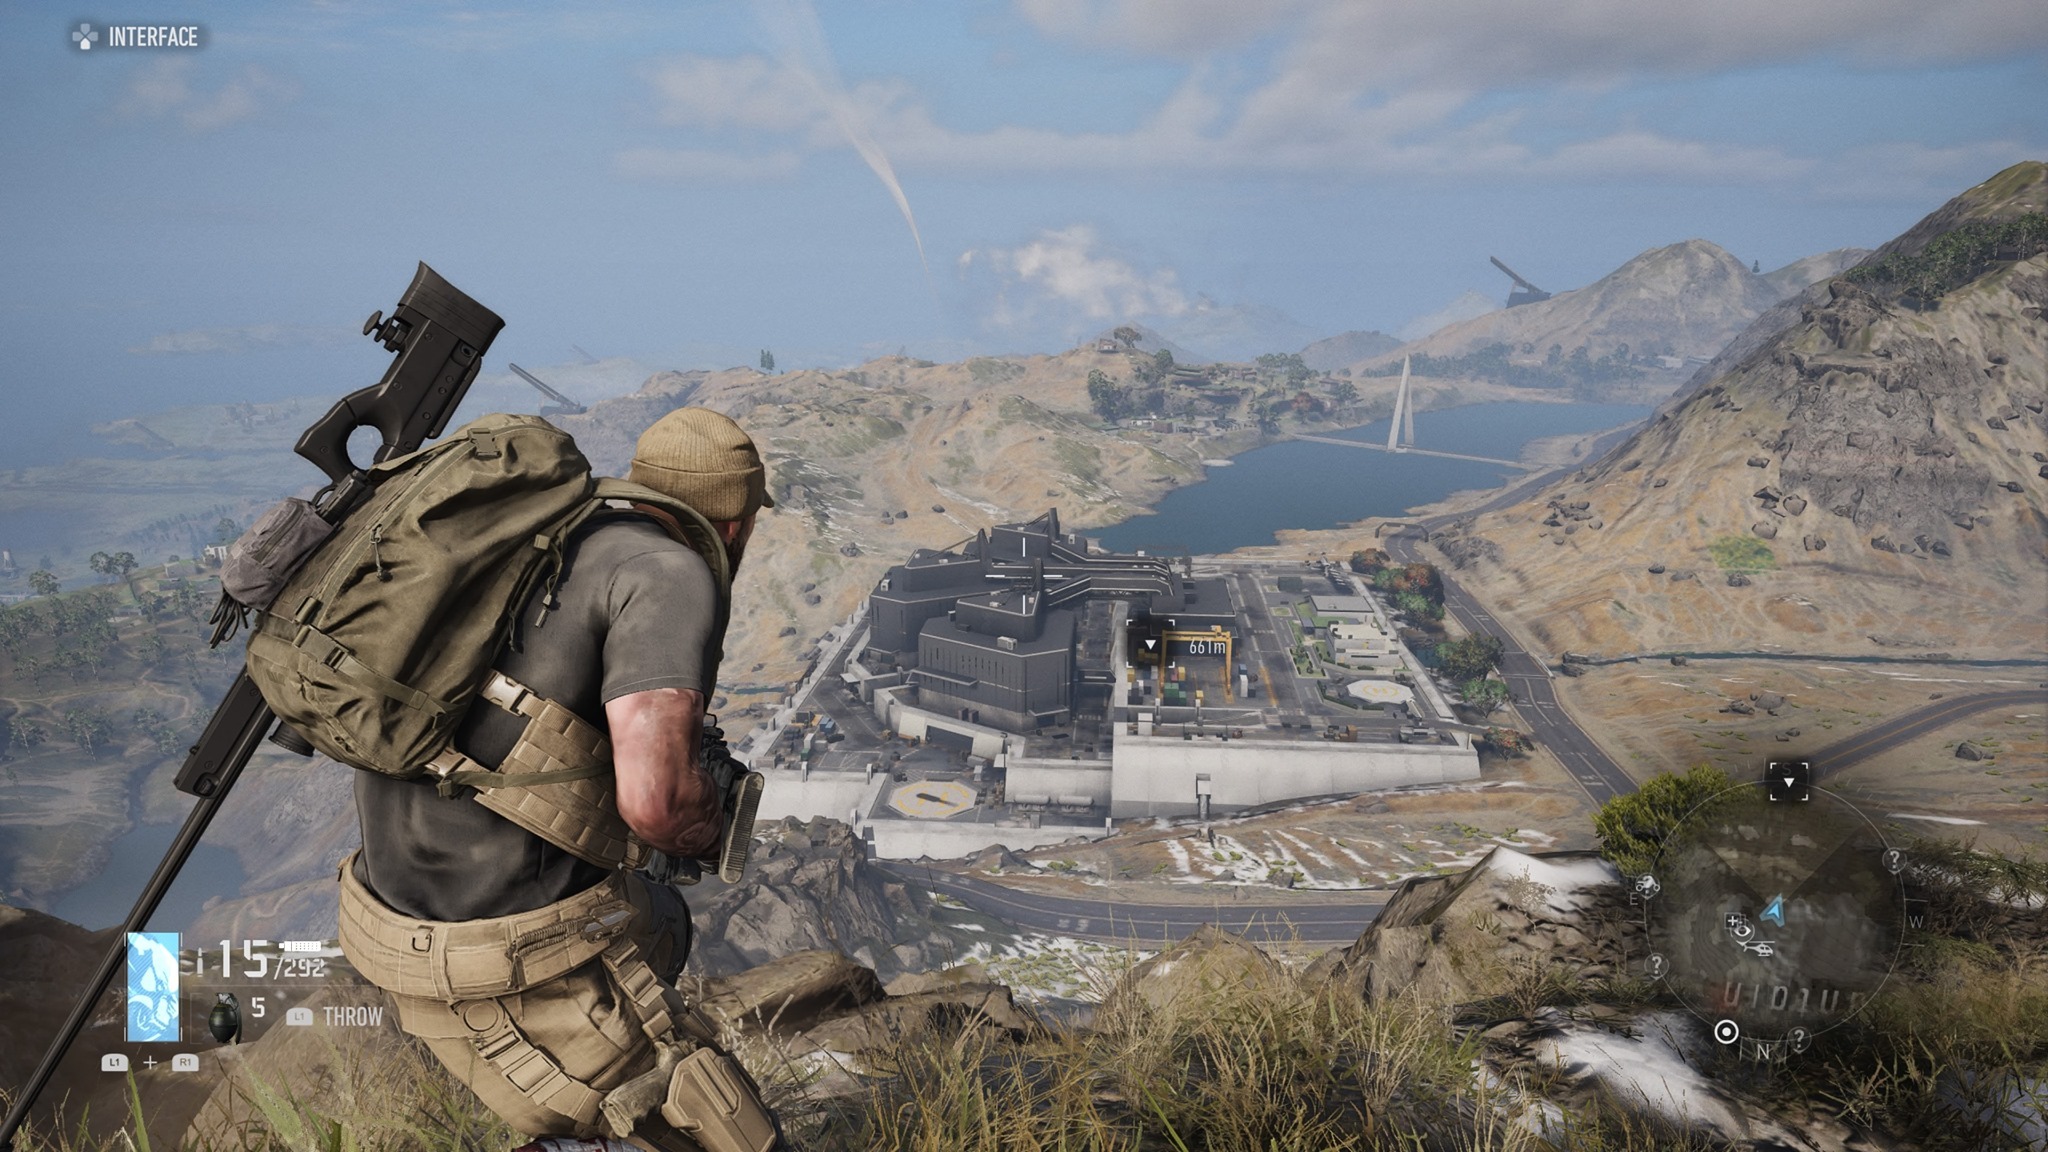 Ghost Recon Breakpoint Review Faulty Reconaissance GameSpot. 